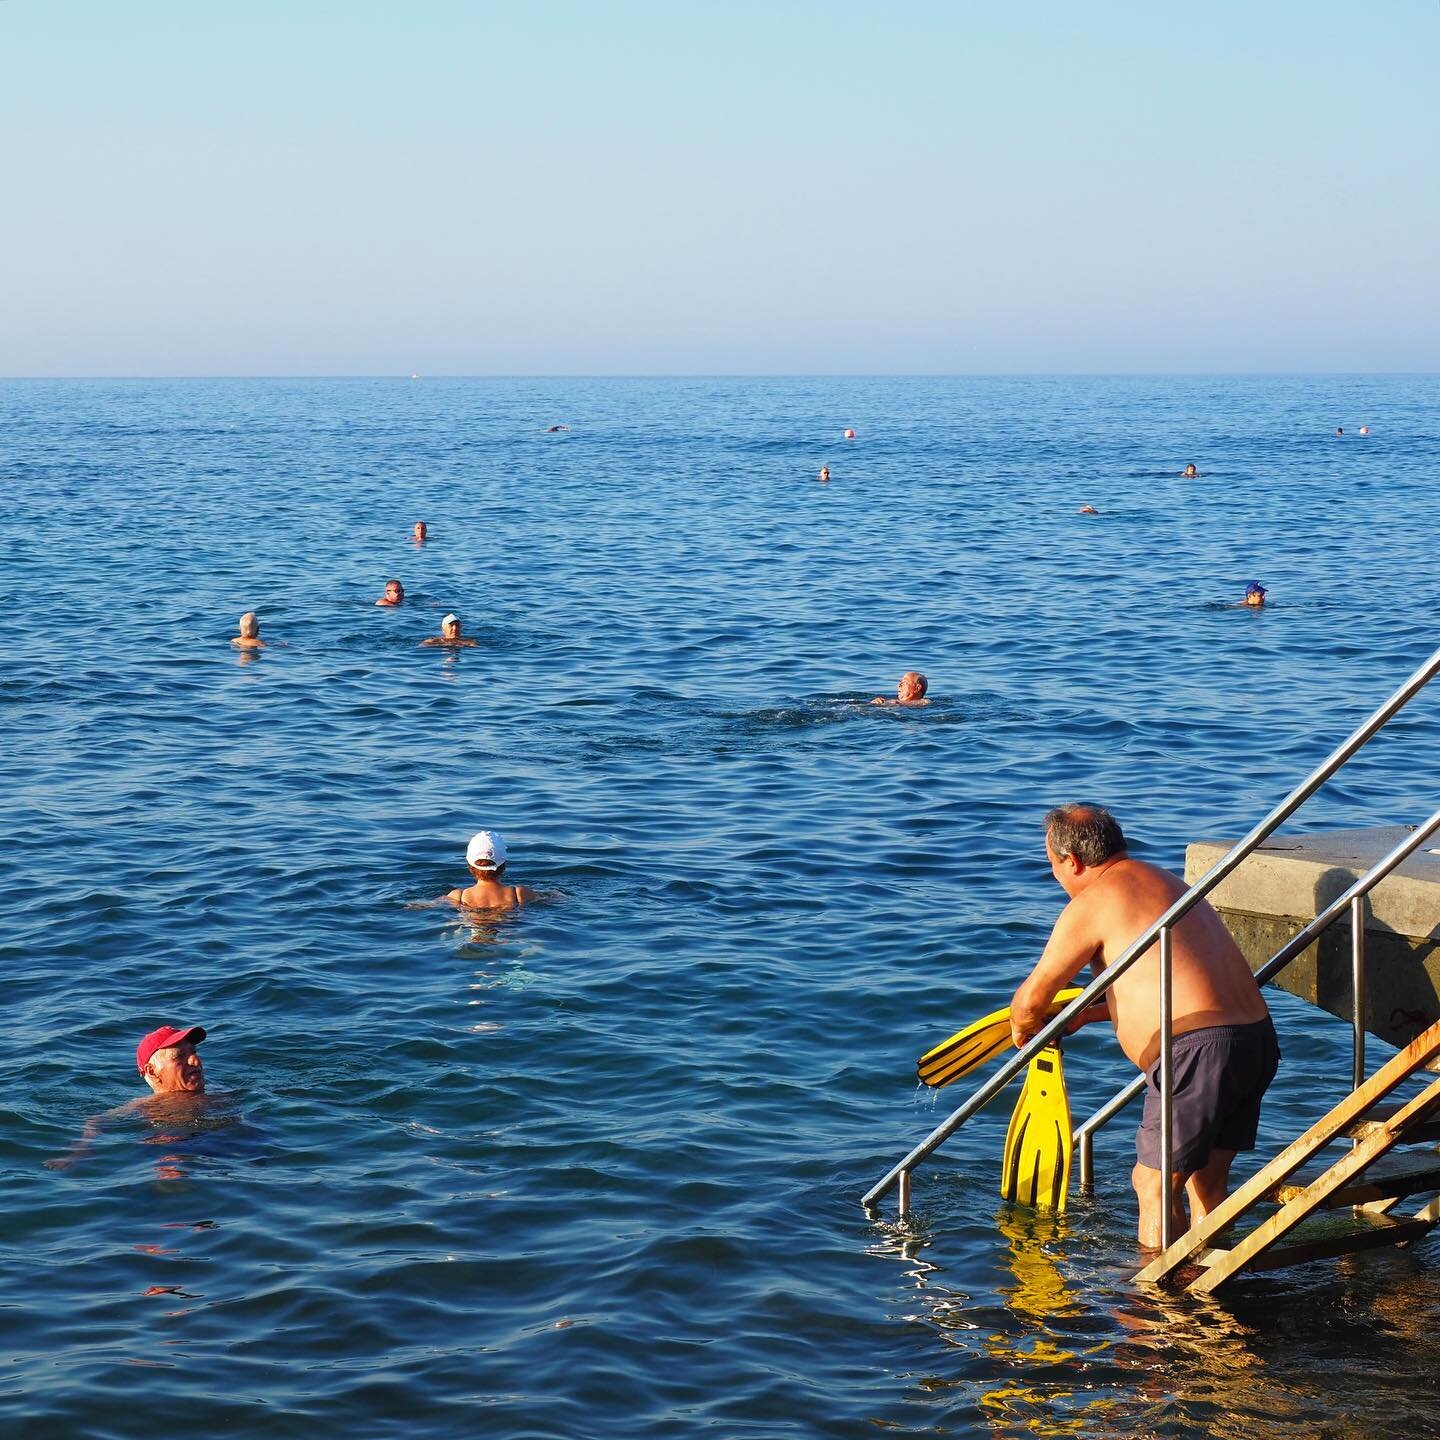 What a way to start the day, hey?
〰
Every morning in Paphos before the tourists wake up, locals congregate at the municipal baths (essentially a staircase into the sea) for a dip and a chat, gossiping in Greek as they tread water in the calm, clear w